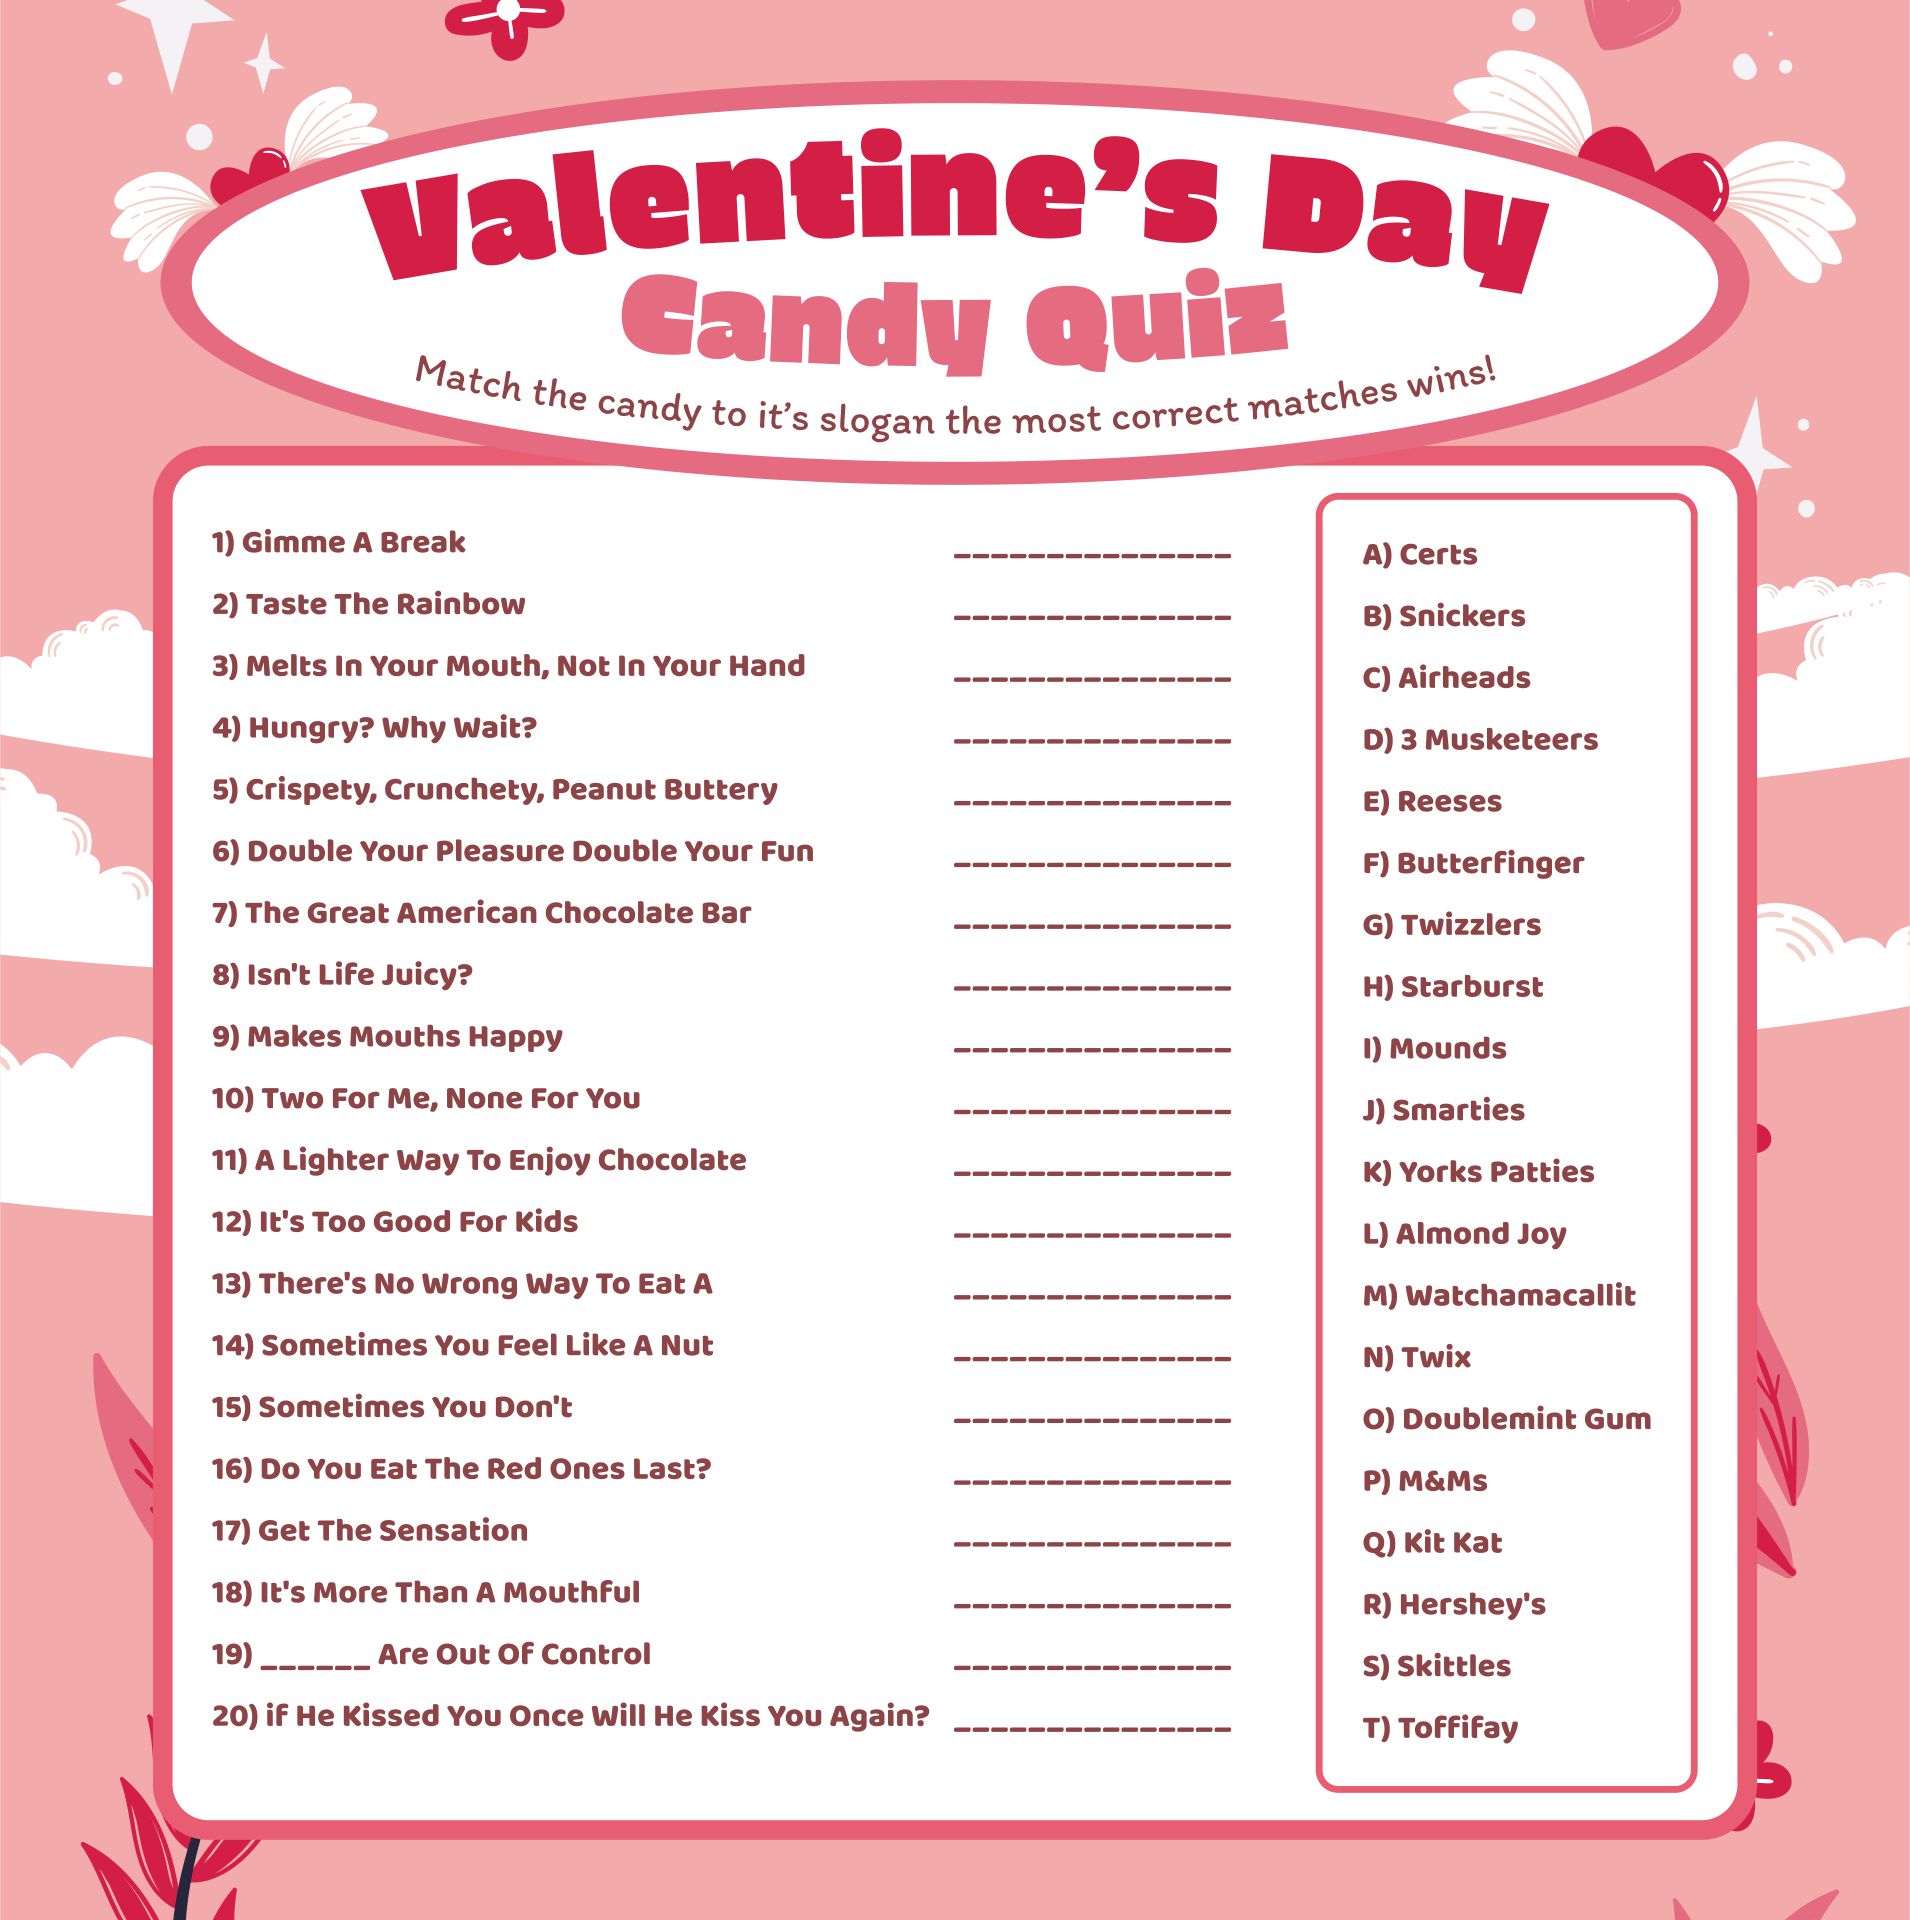 5 Best Images of Valentine Day Candy Trivia Printable - Valentine's Day ...